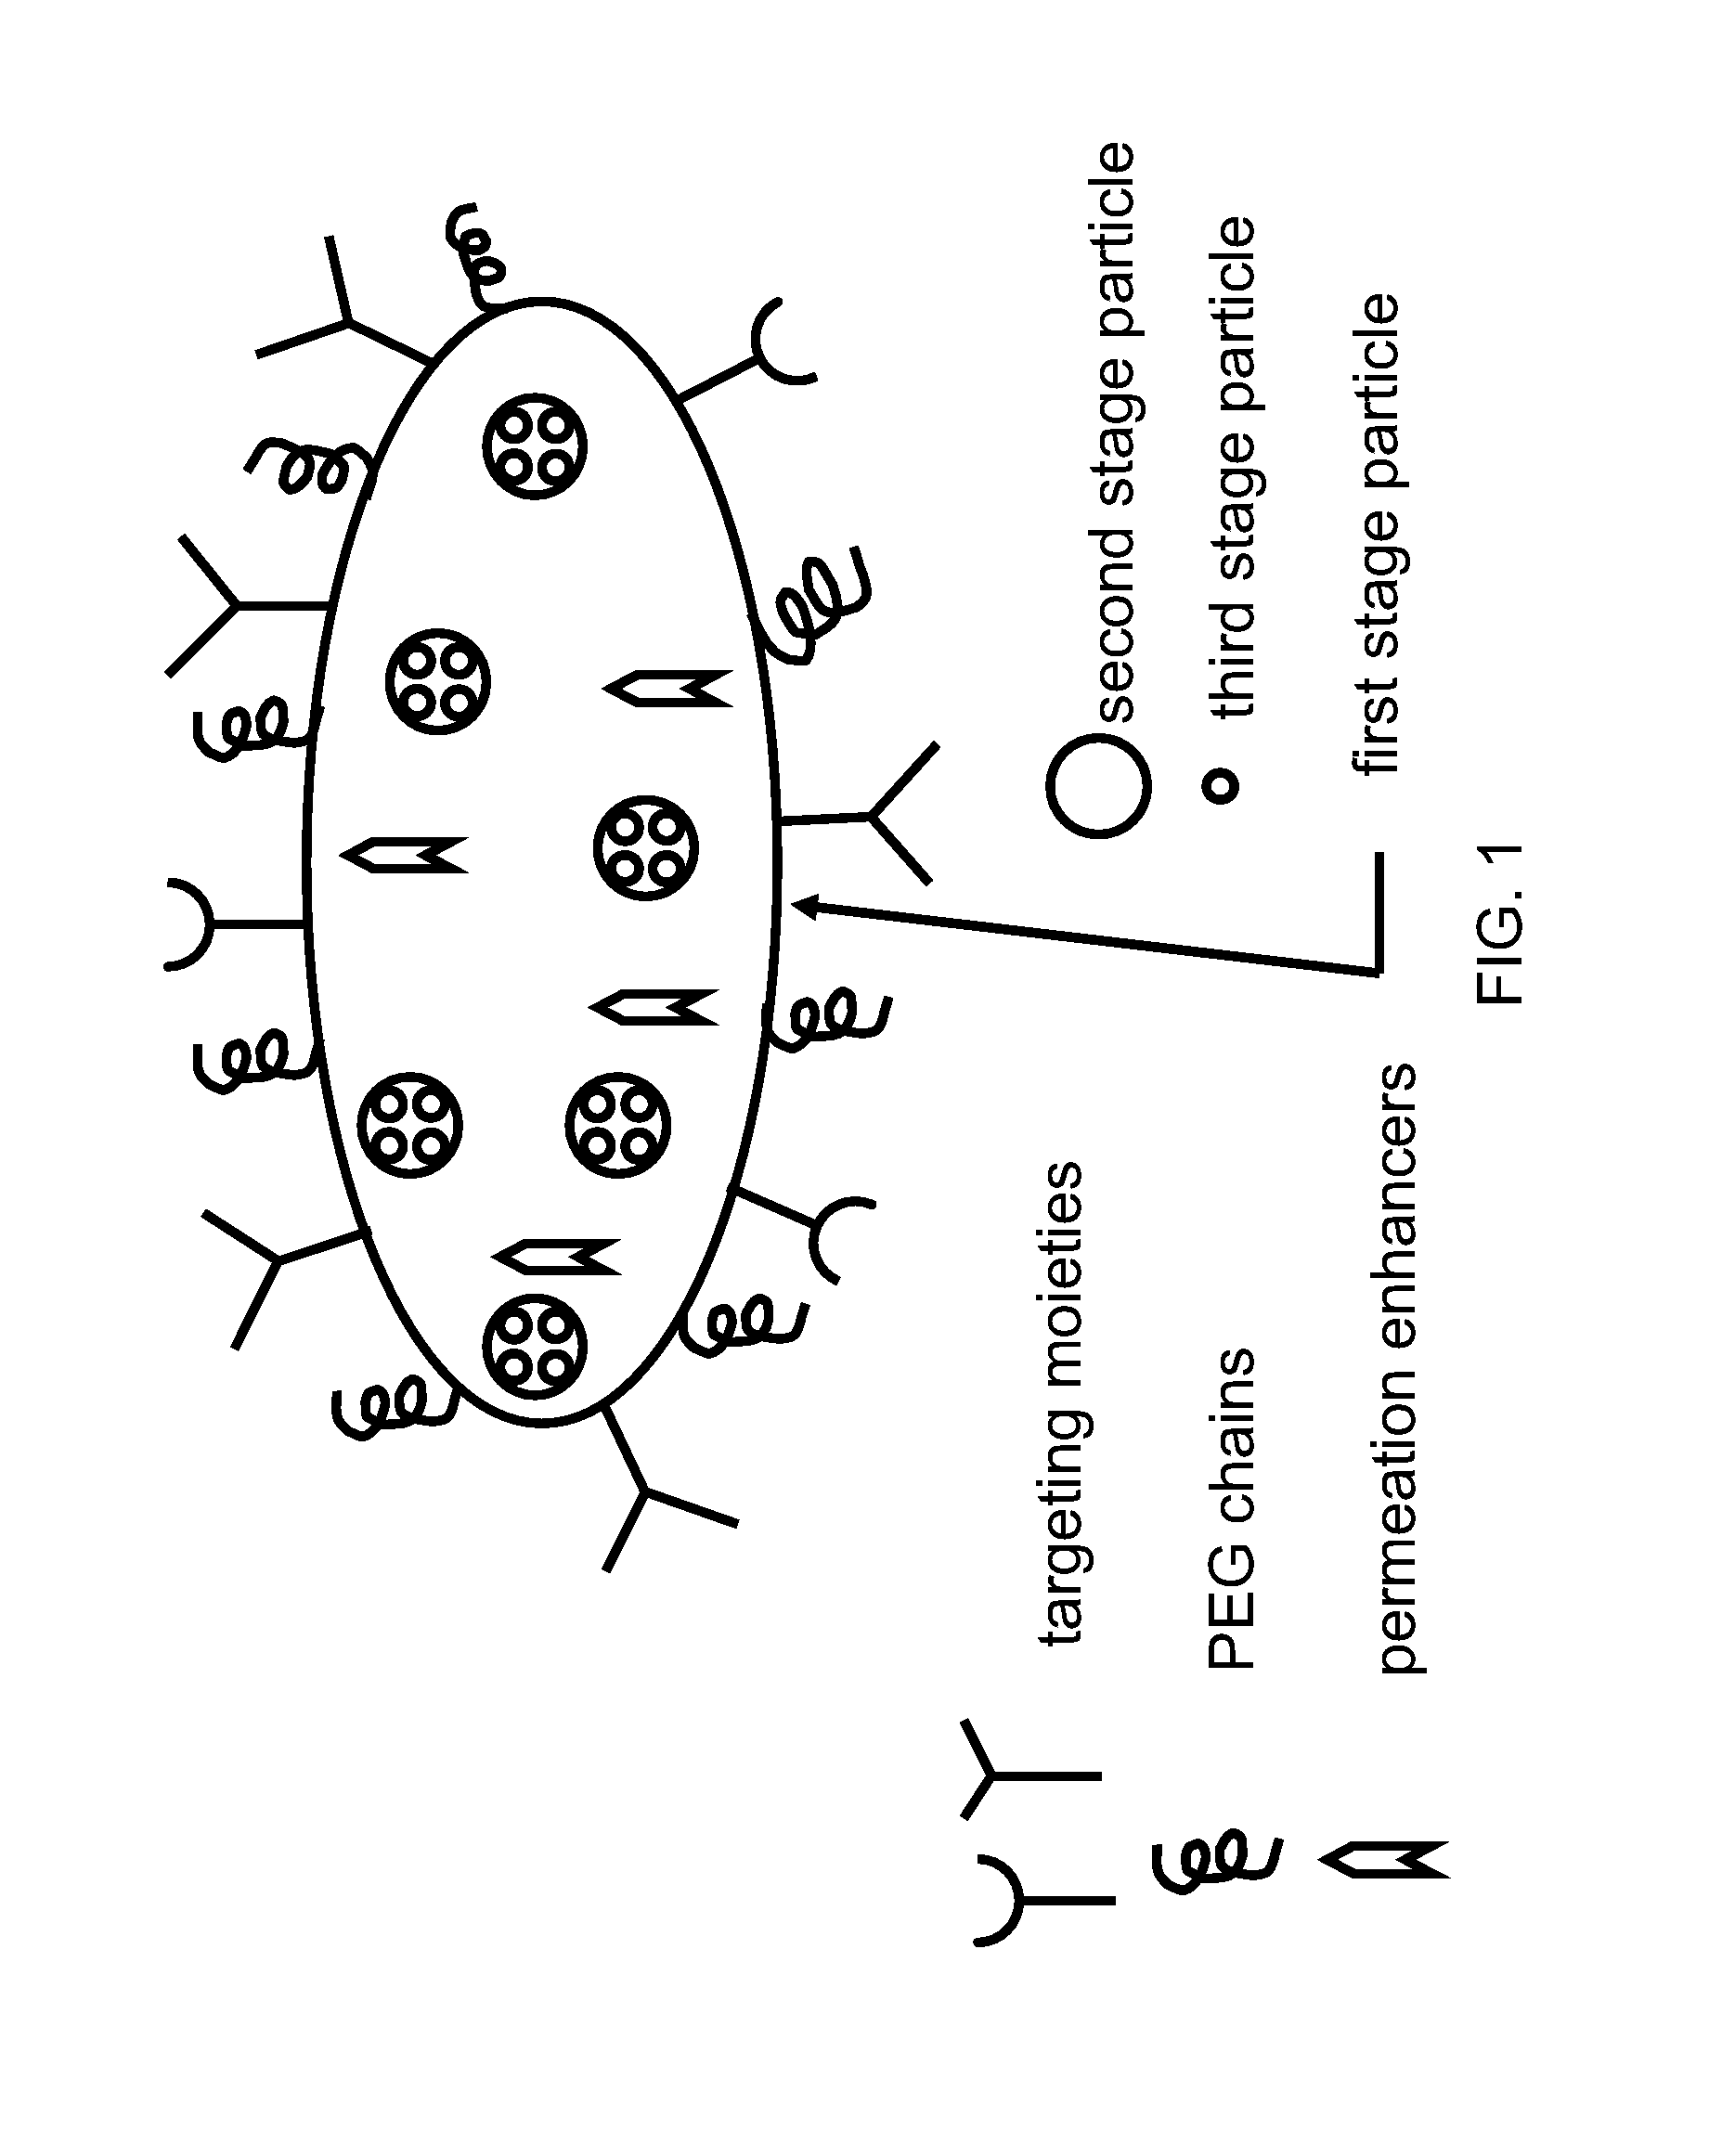 Multistage delivery of active agents